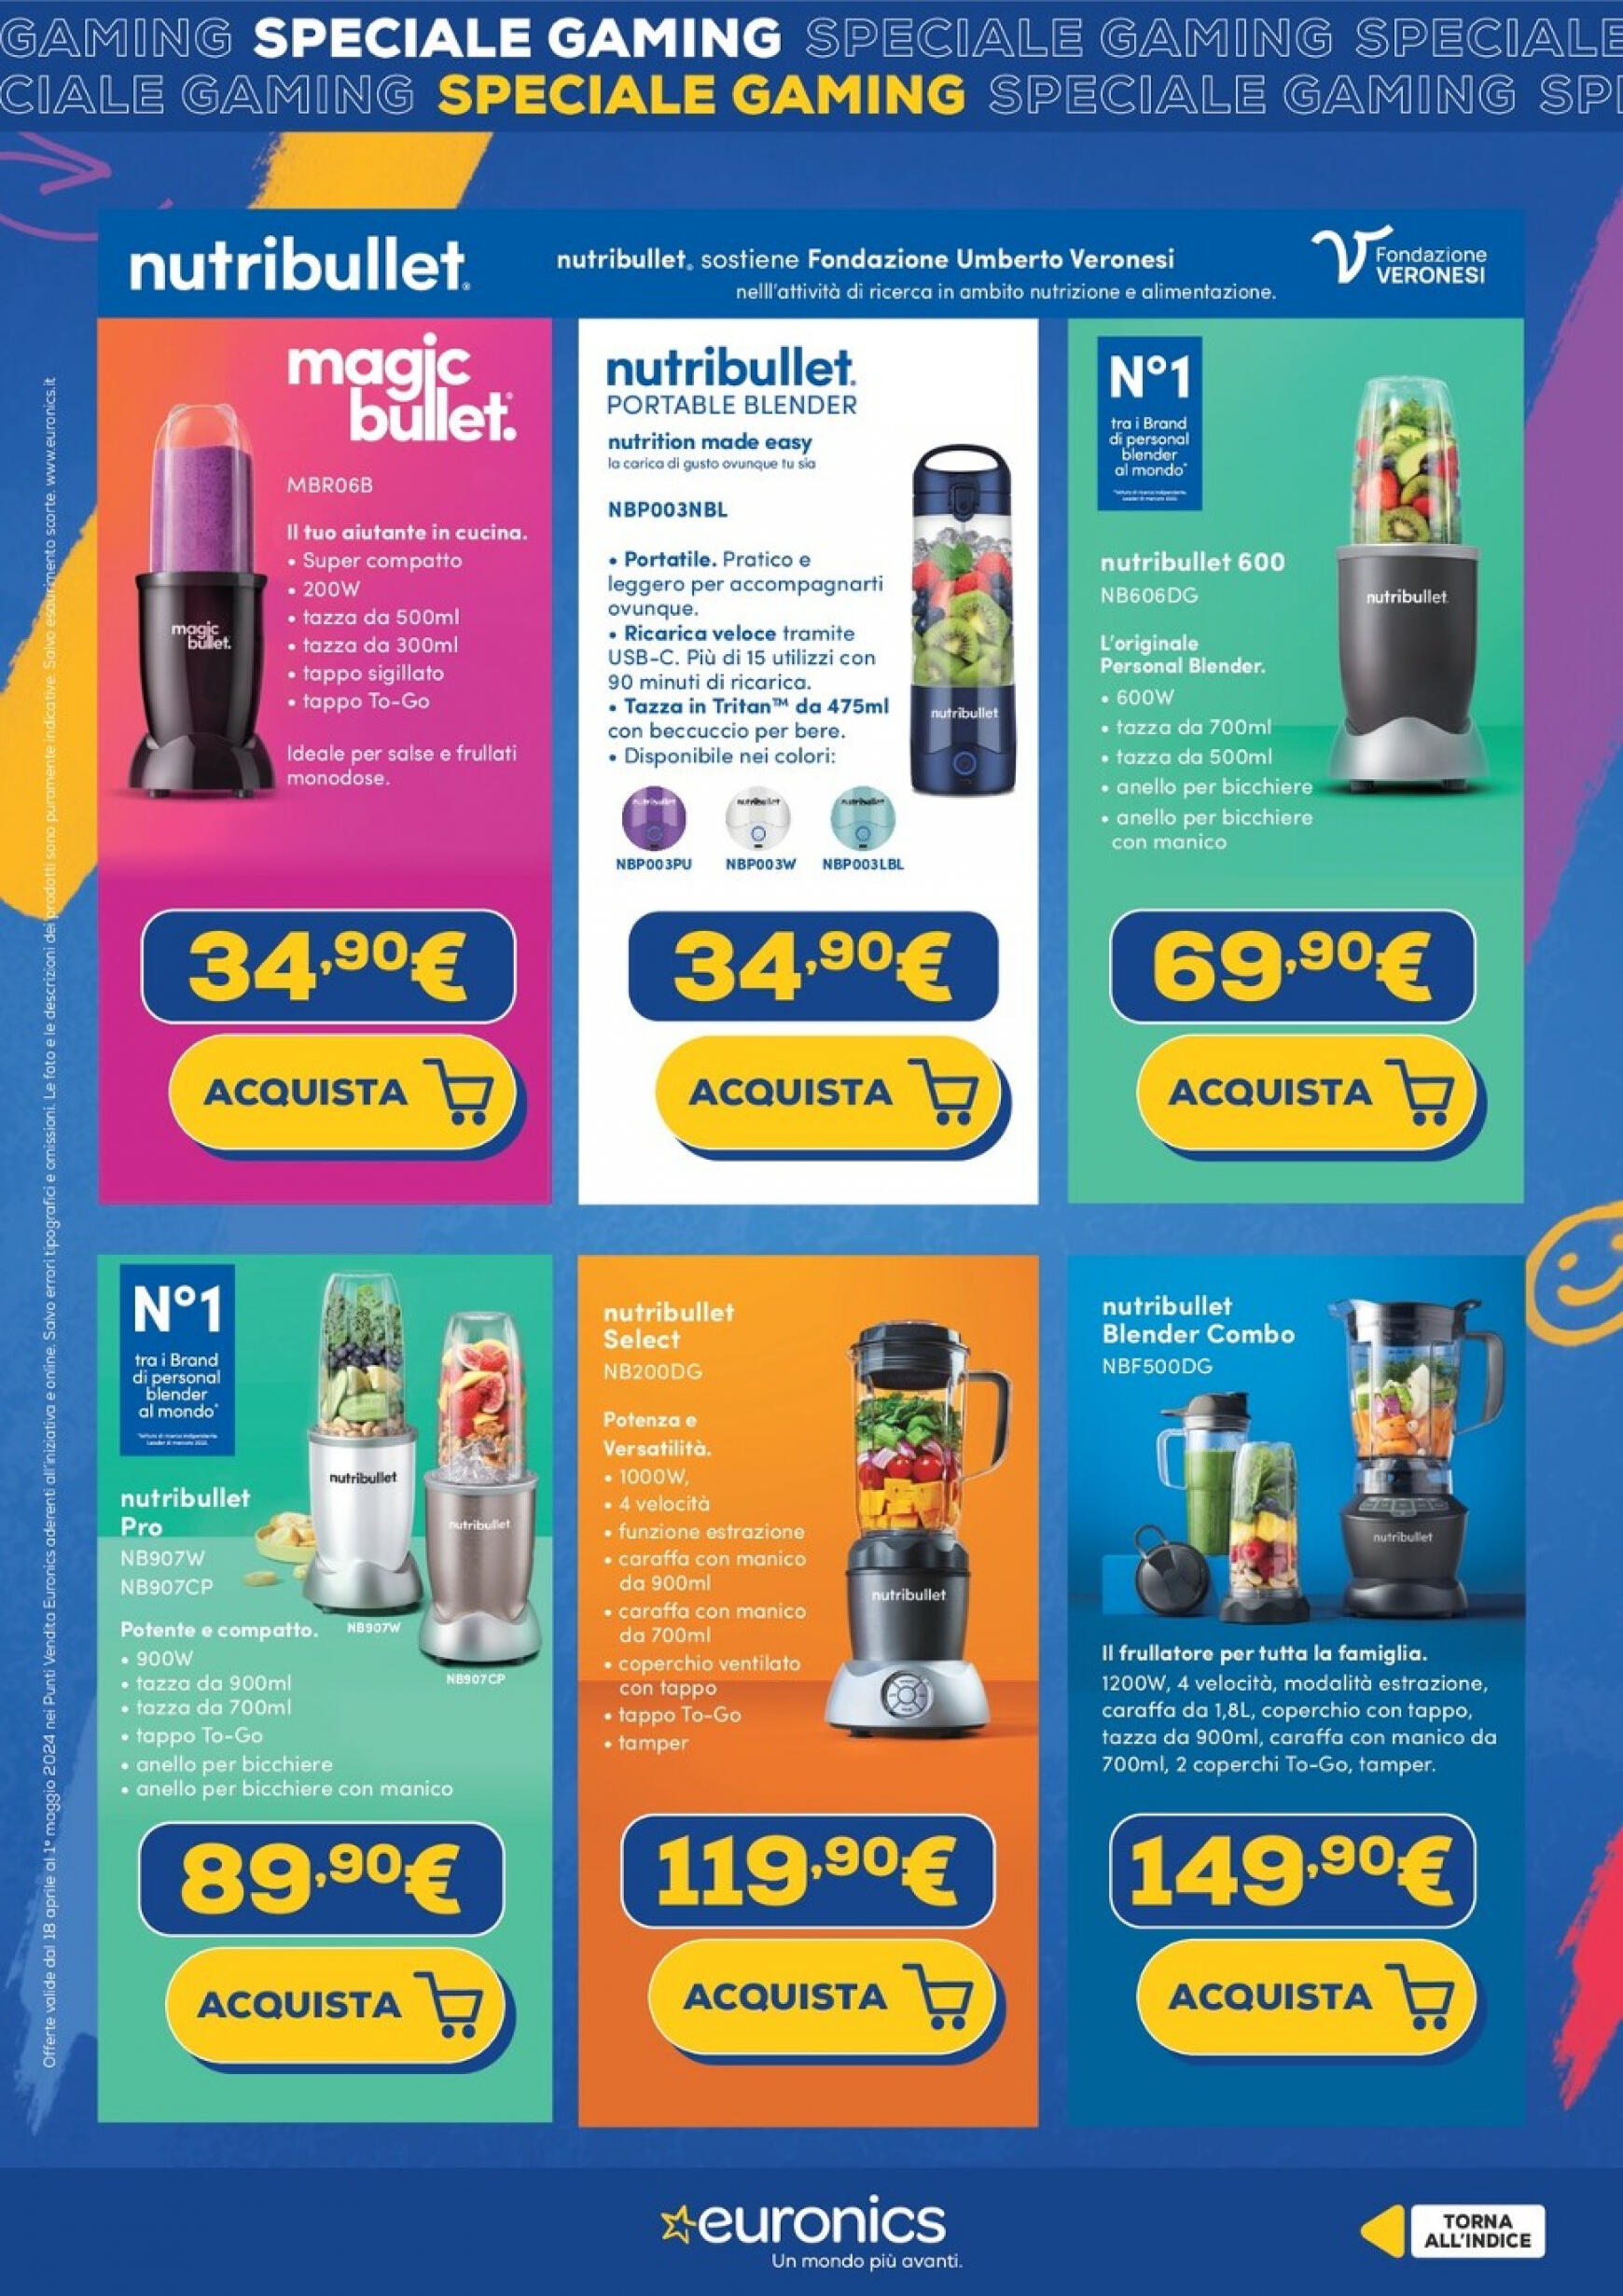 euronics - Nuovo volantino Euronics - Speciale Gaming 18.04. - 01.05. - page: 26